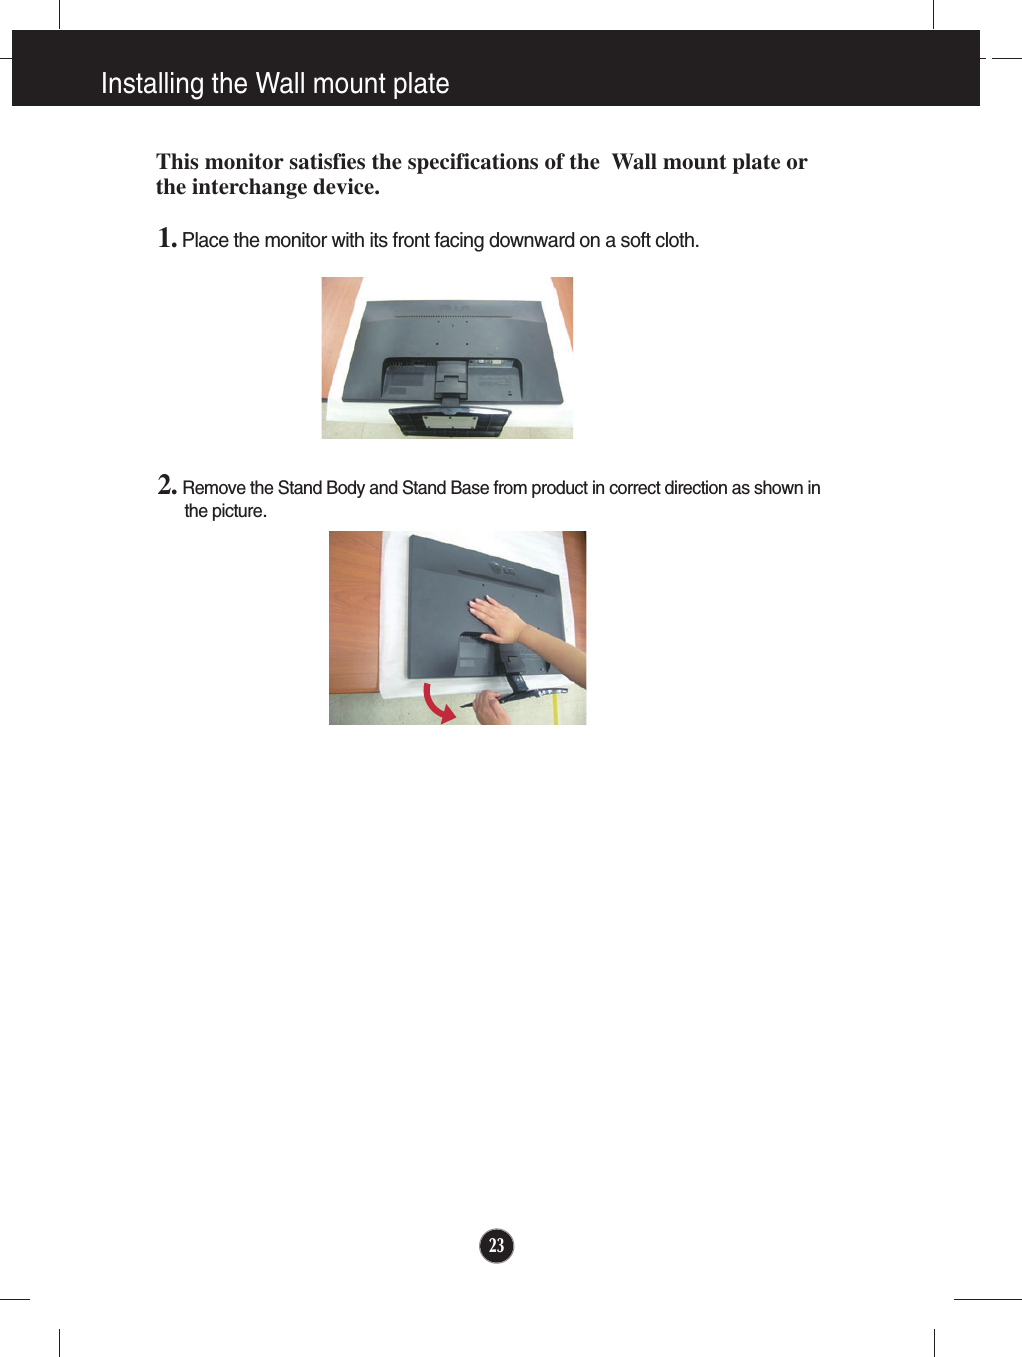 231. Place the monitor with its front facing downward on a soft cloth.2. Remove the Stand Body and Stand Base from product in correct direction as shown inthe picture.Installing the Wall mount plateThis monitor satisfies the specifications of the  Wall mount plate orthe interchange device.